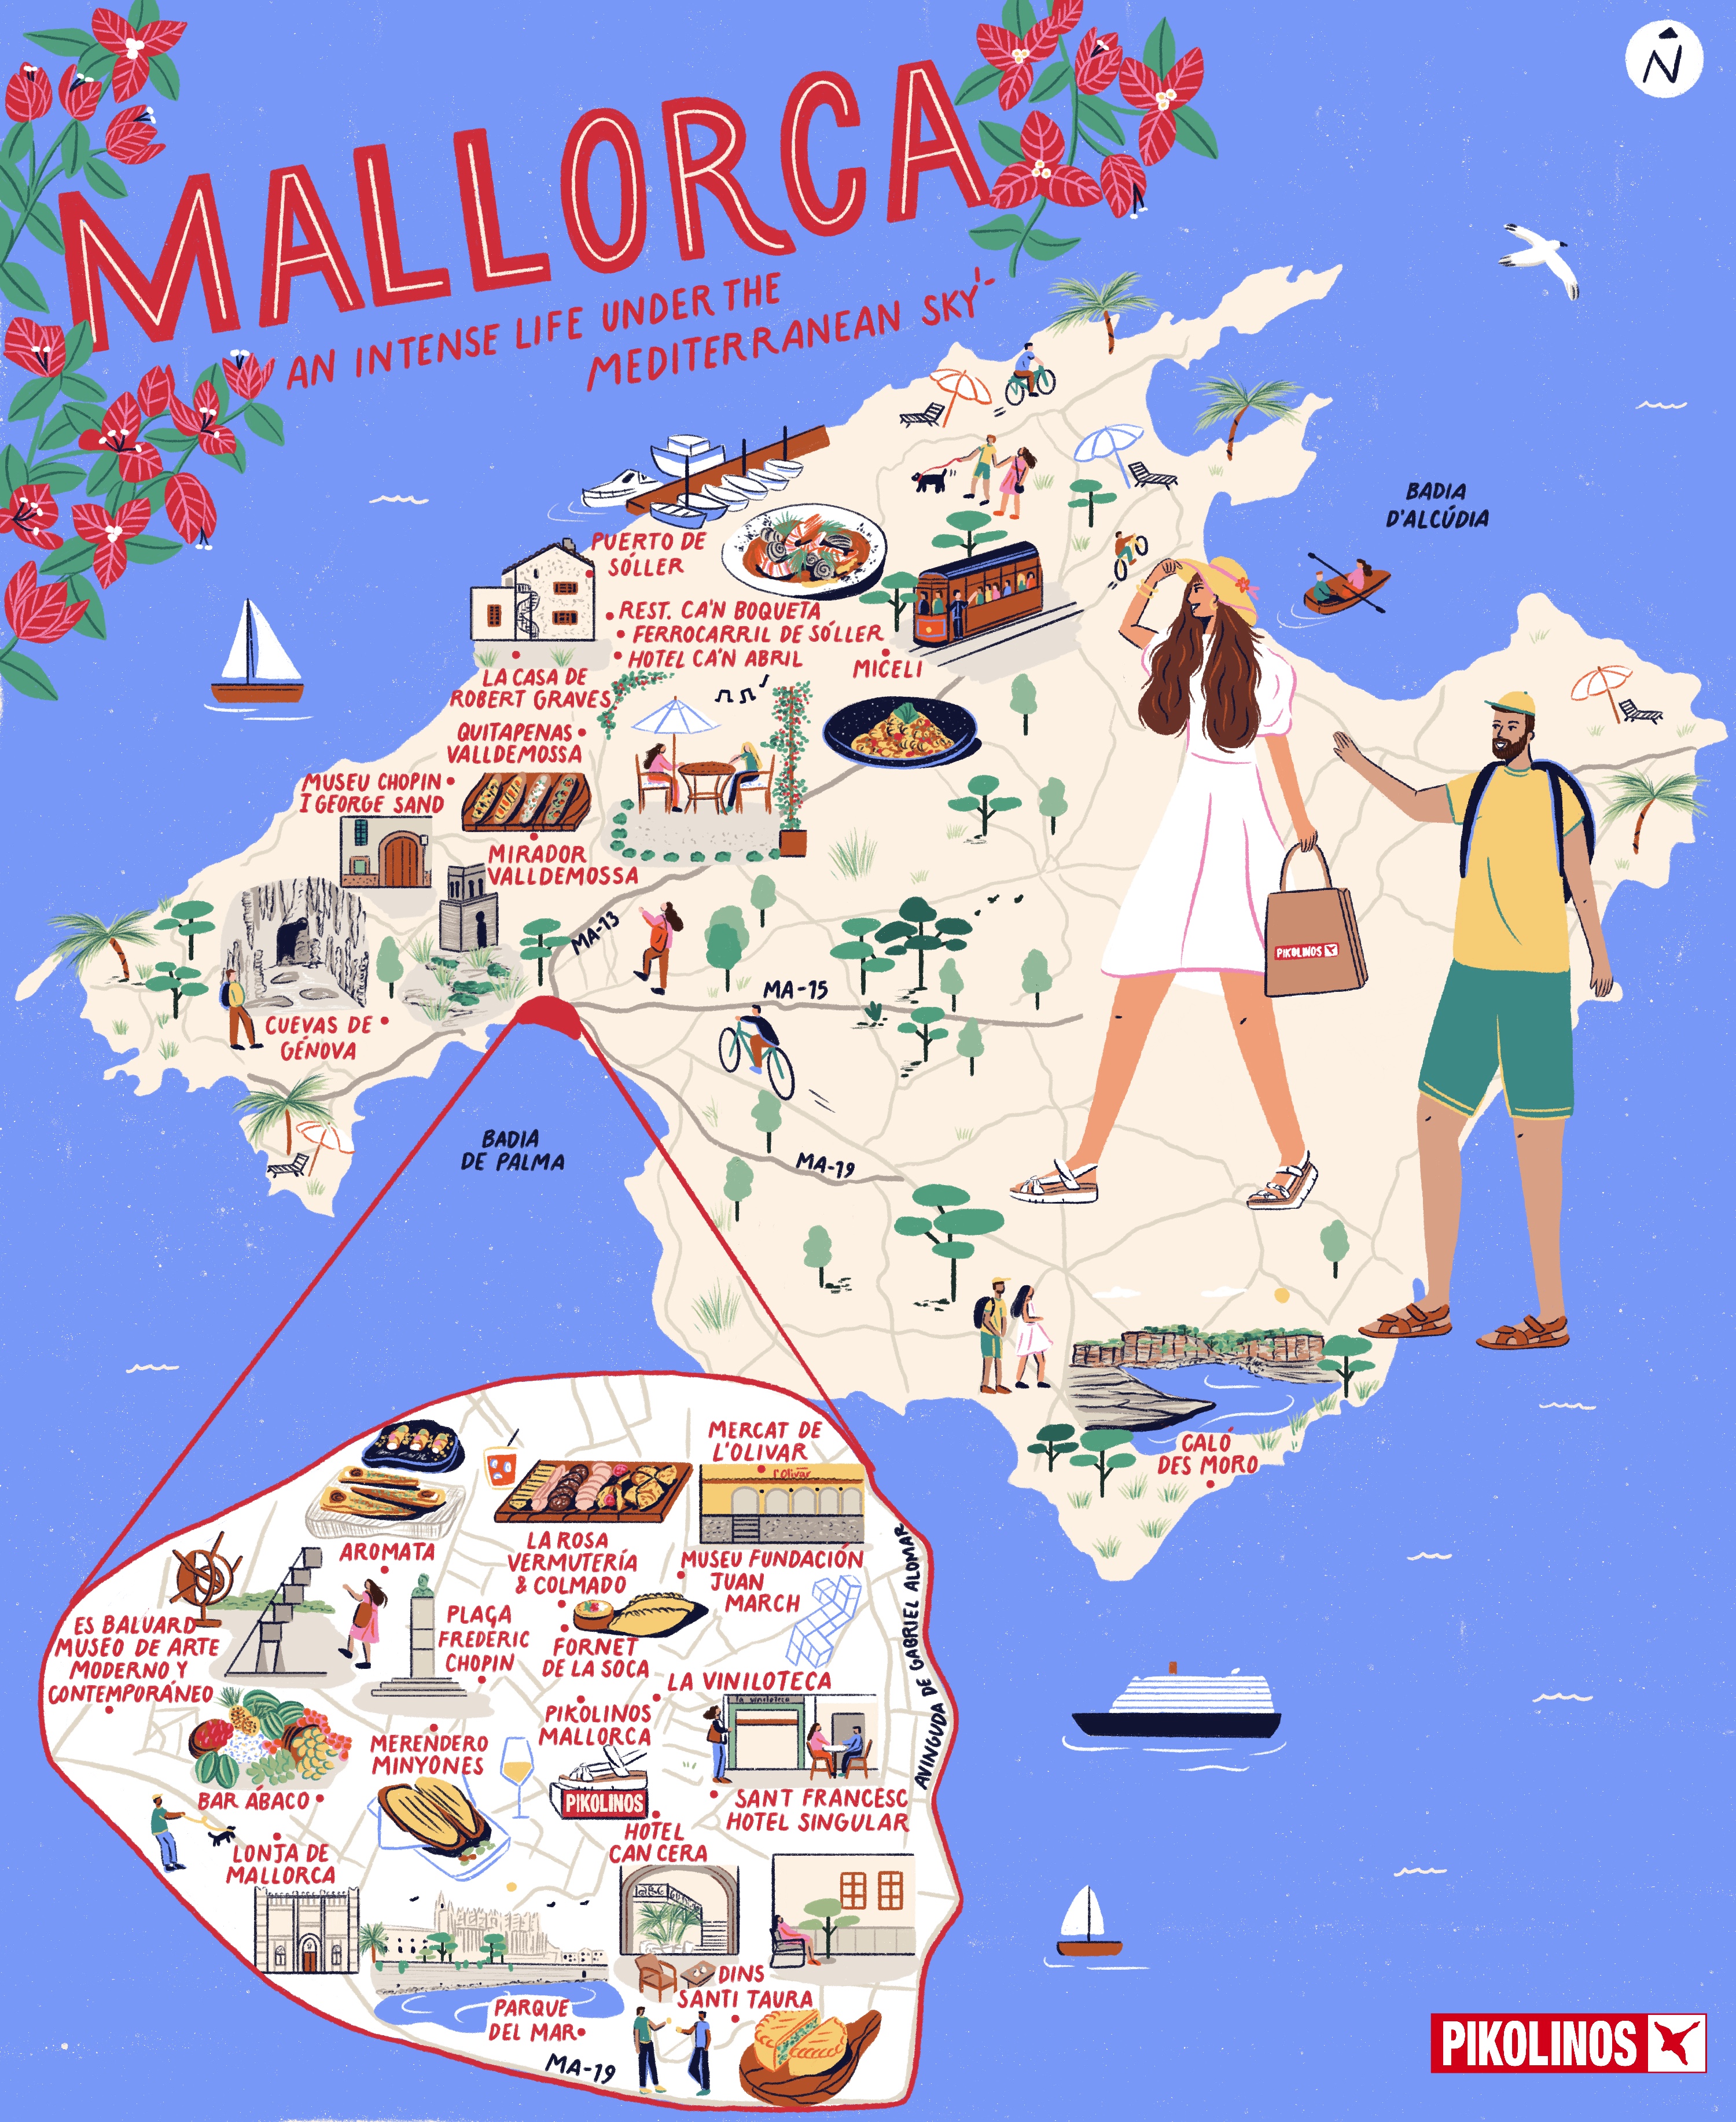 Illustration of a map of Mallorca with drawings of interesting things about the place